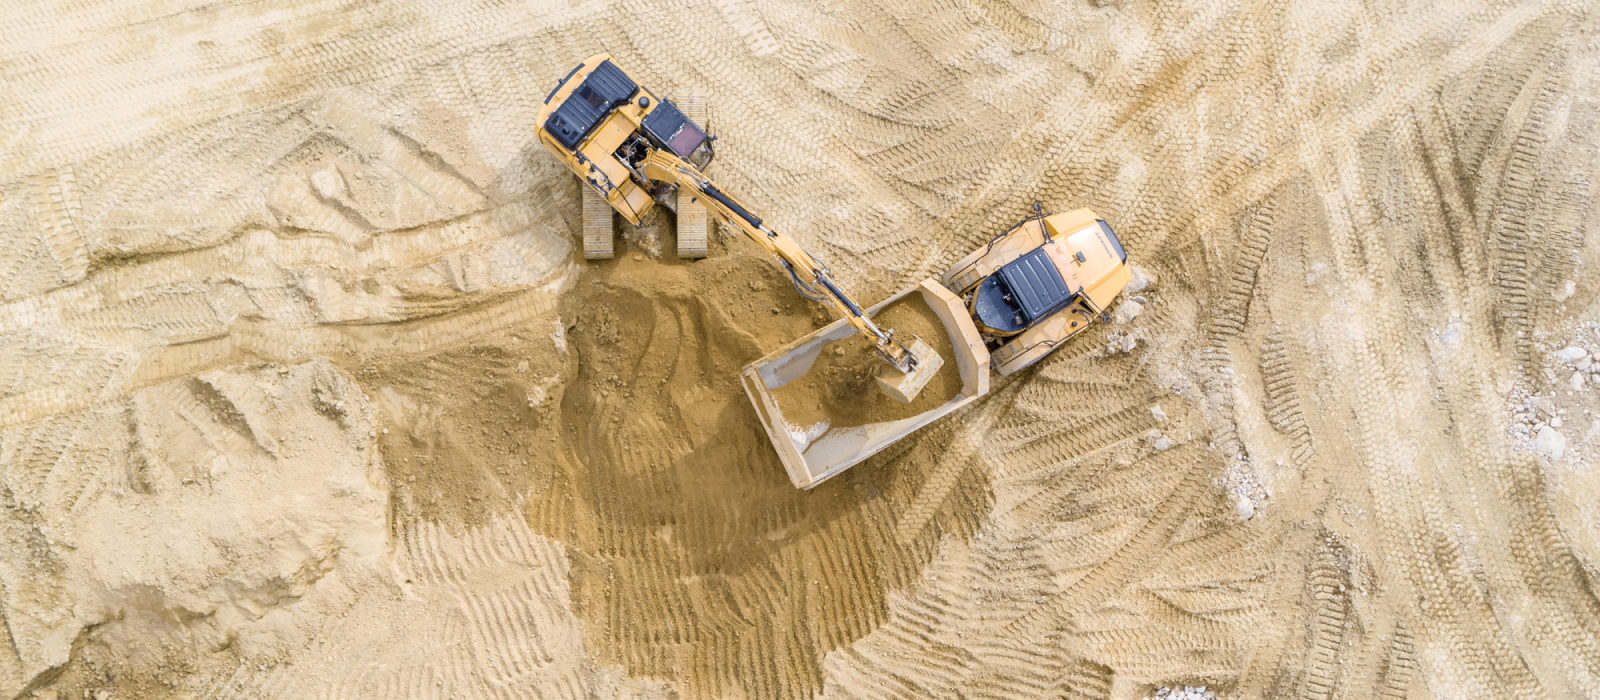 Aerial View Showing Sargent's Large Equipment's Moving Fine Grading Using Large Excavator and Dump Truck